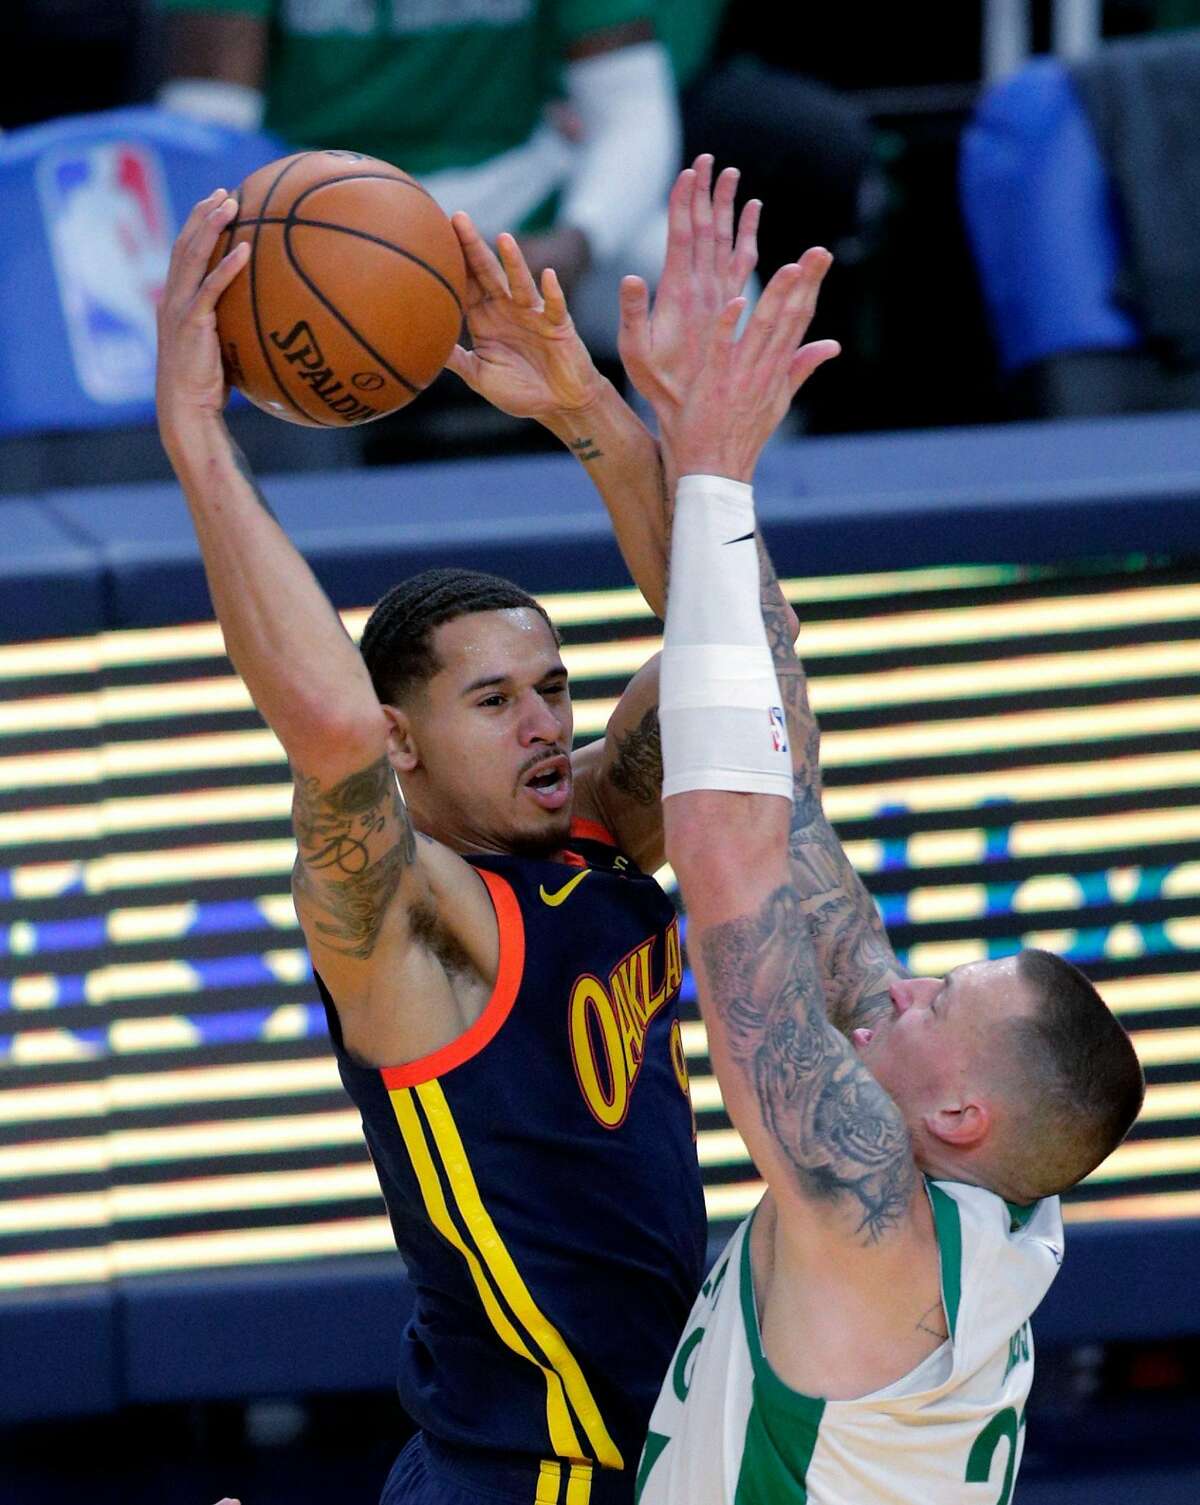 Juan Toscano Anderson (95) passes over Daniel Theil (27) in the first half as the Golden State Warriors played the Boston Celtics at Chase Center in San Francisco, Calif., on Tuesday, February 2, 2021.